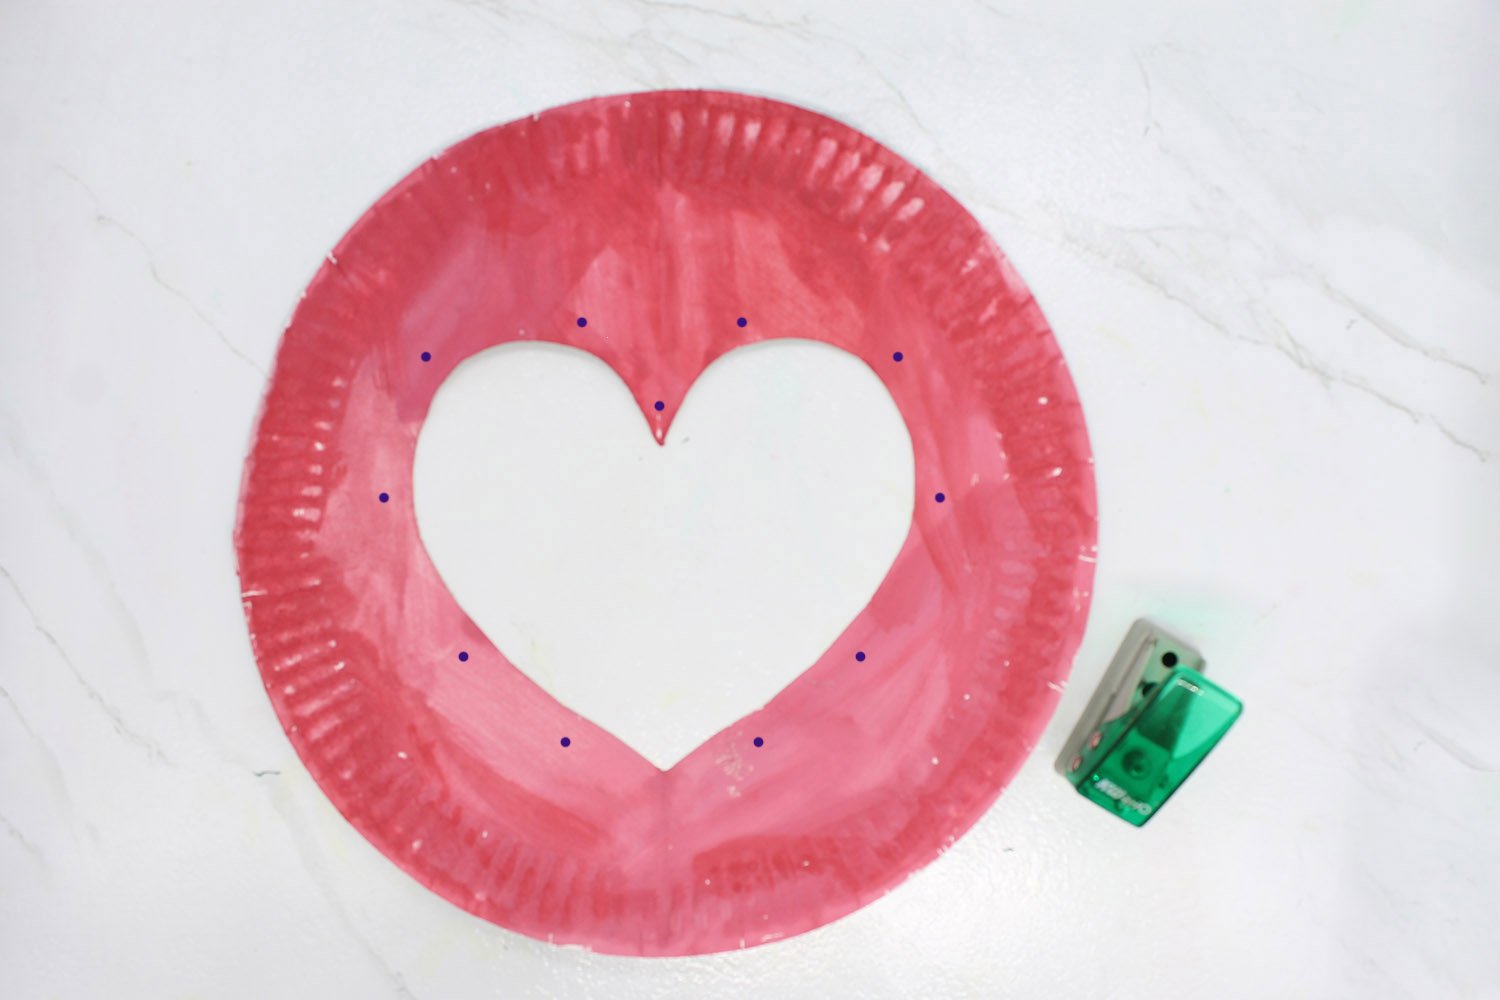 How To Make a Paper Plate Heart - Step 08